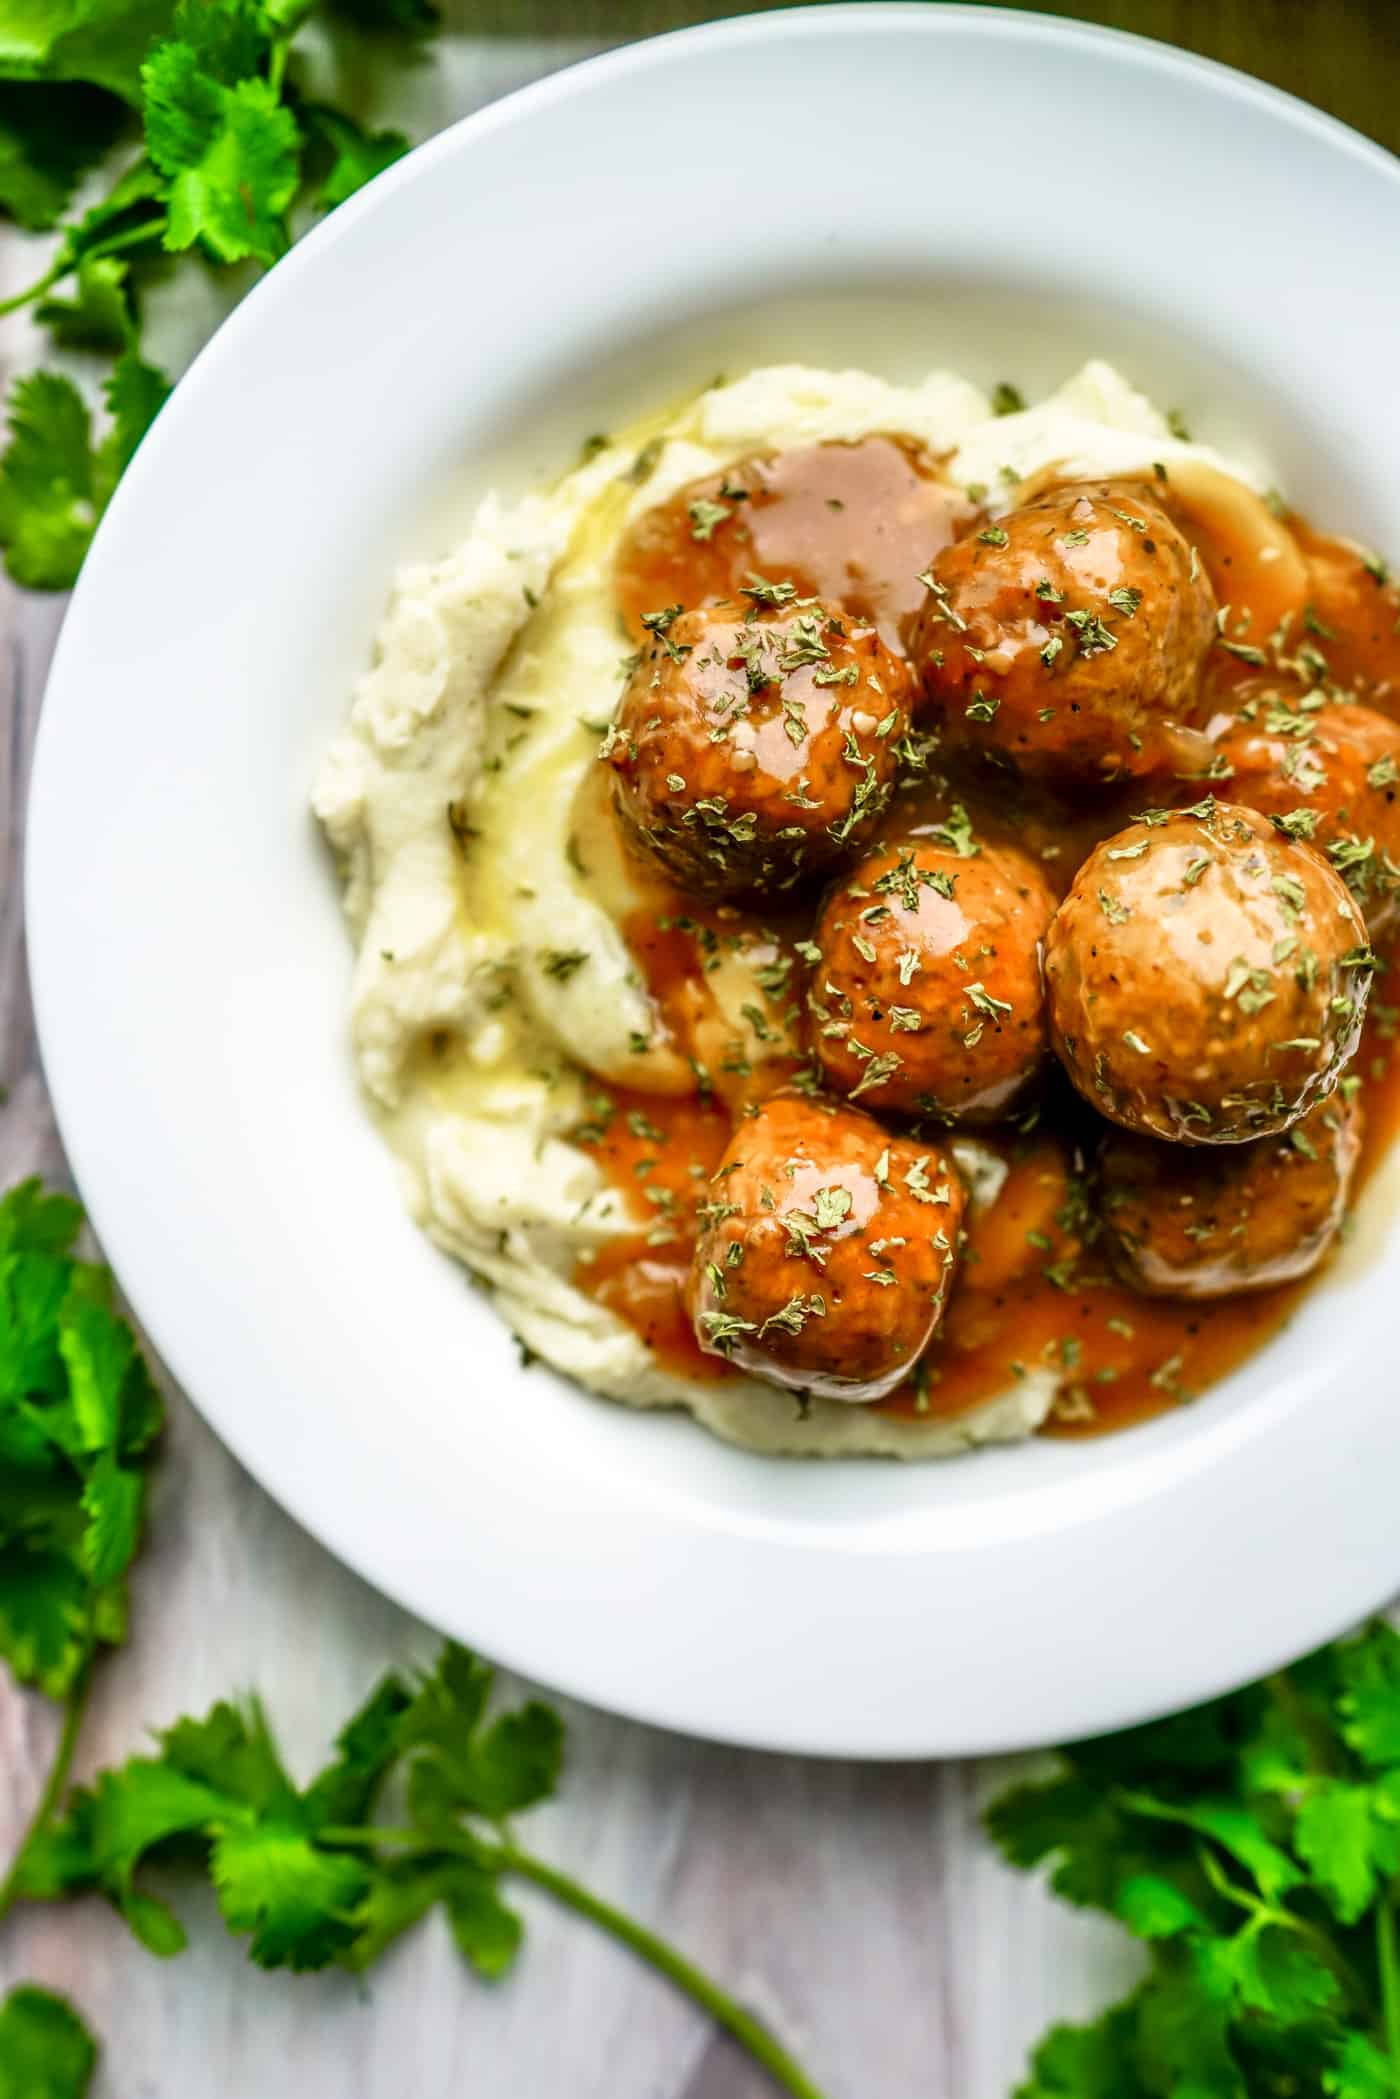 Calling all gravy lovers!  This Instant Pot Meatballs and Gravy recipe with cauliflower mash is a new Instant Pot must-try dish! It is low carb, vegan and keto friendly meatballs and gravy recipe. And, perfectly pared with cauliflower mash. Try them today and let us know your thoughts!